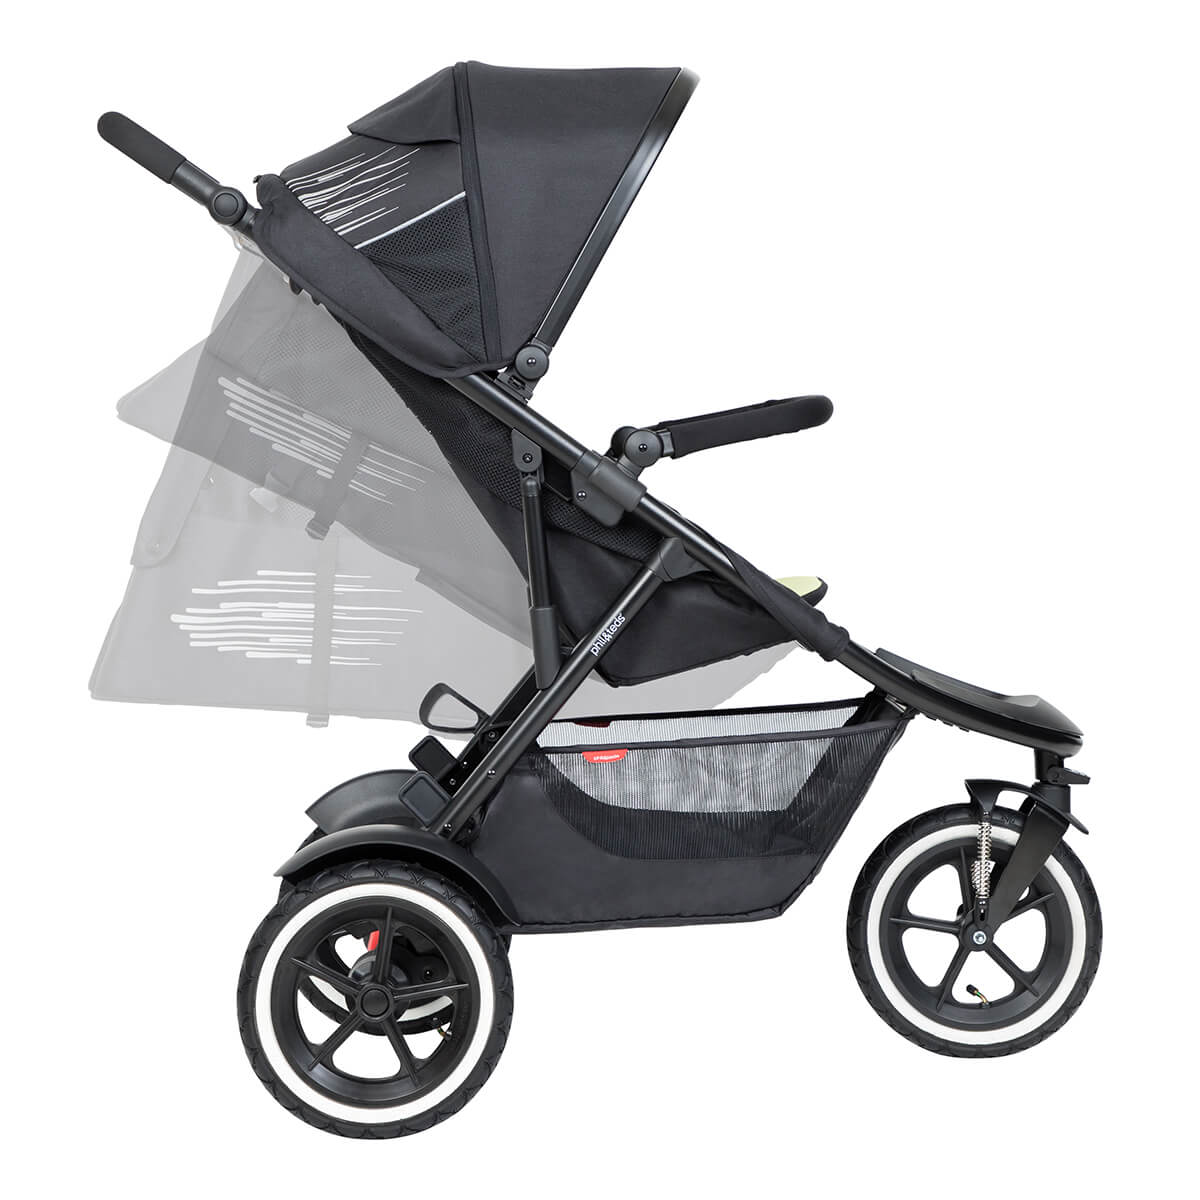 https://cdn.accentuate.io/4546157707369/19119322628201/philteds-sport-buggy-can-recline-in-multiple-angles-including-full-recline-for-newborn-baby-v1625778257328.jpg?1200x1200